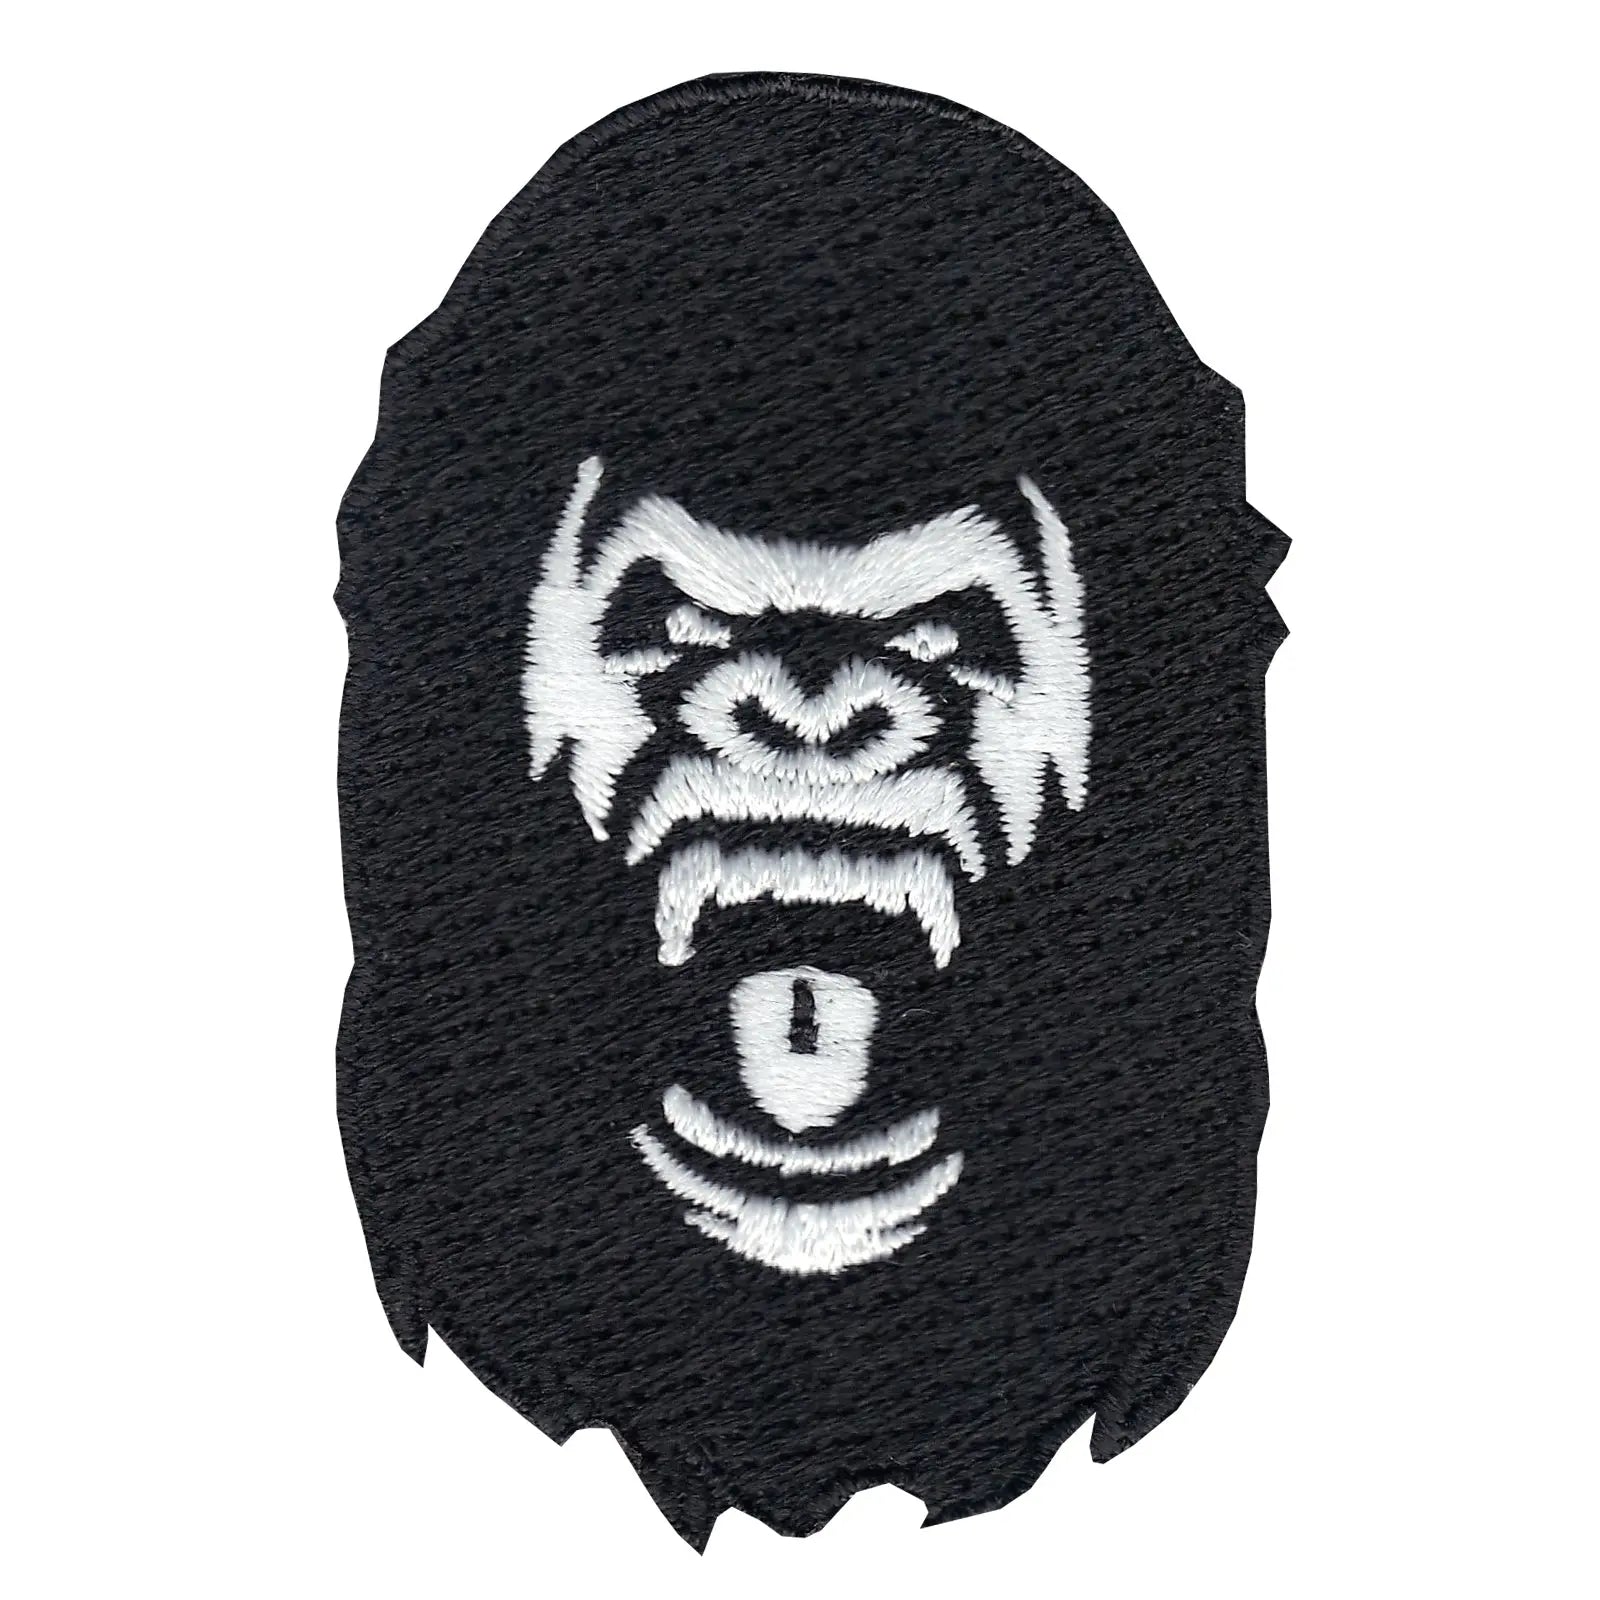 Ape Head Embroidered Iron On Patch 